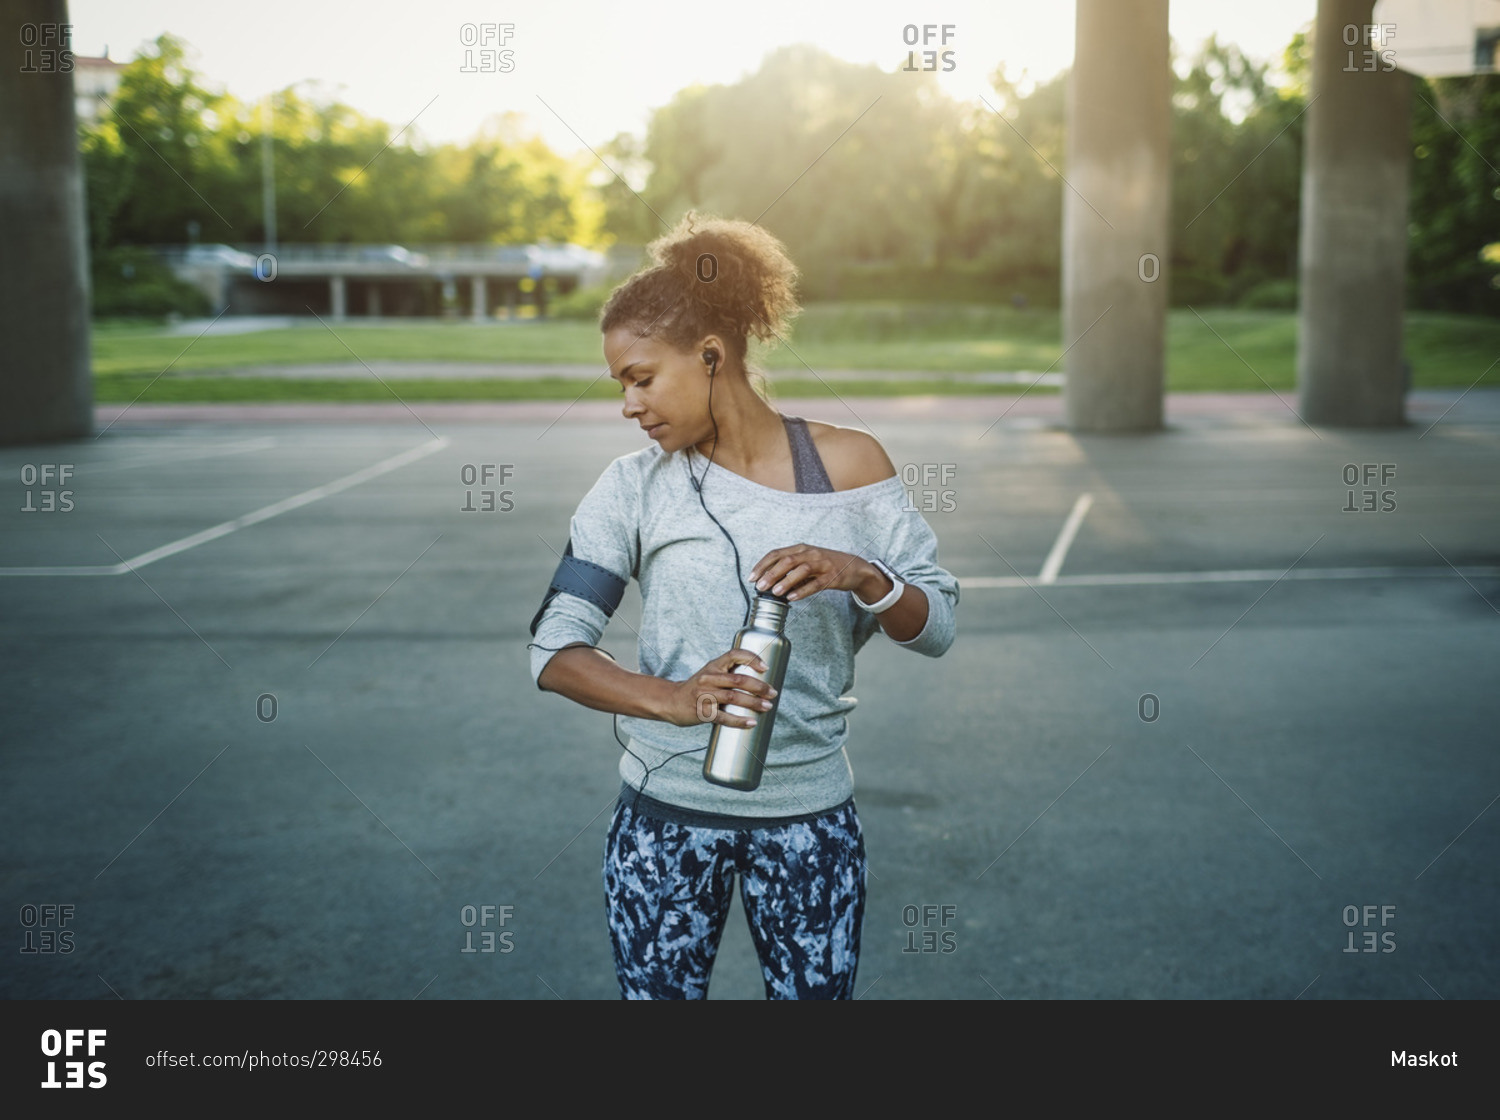 Woman holding water bottle looking down while standing on street